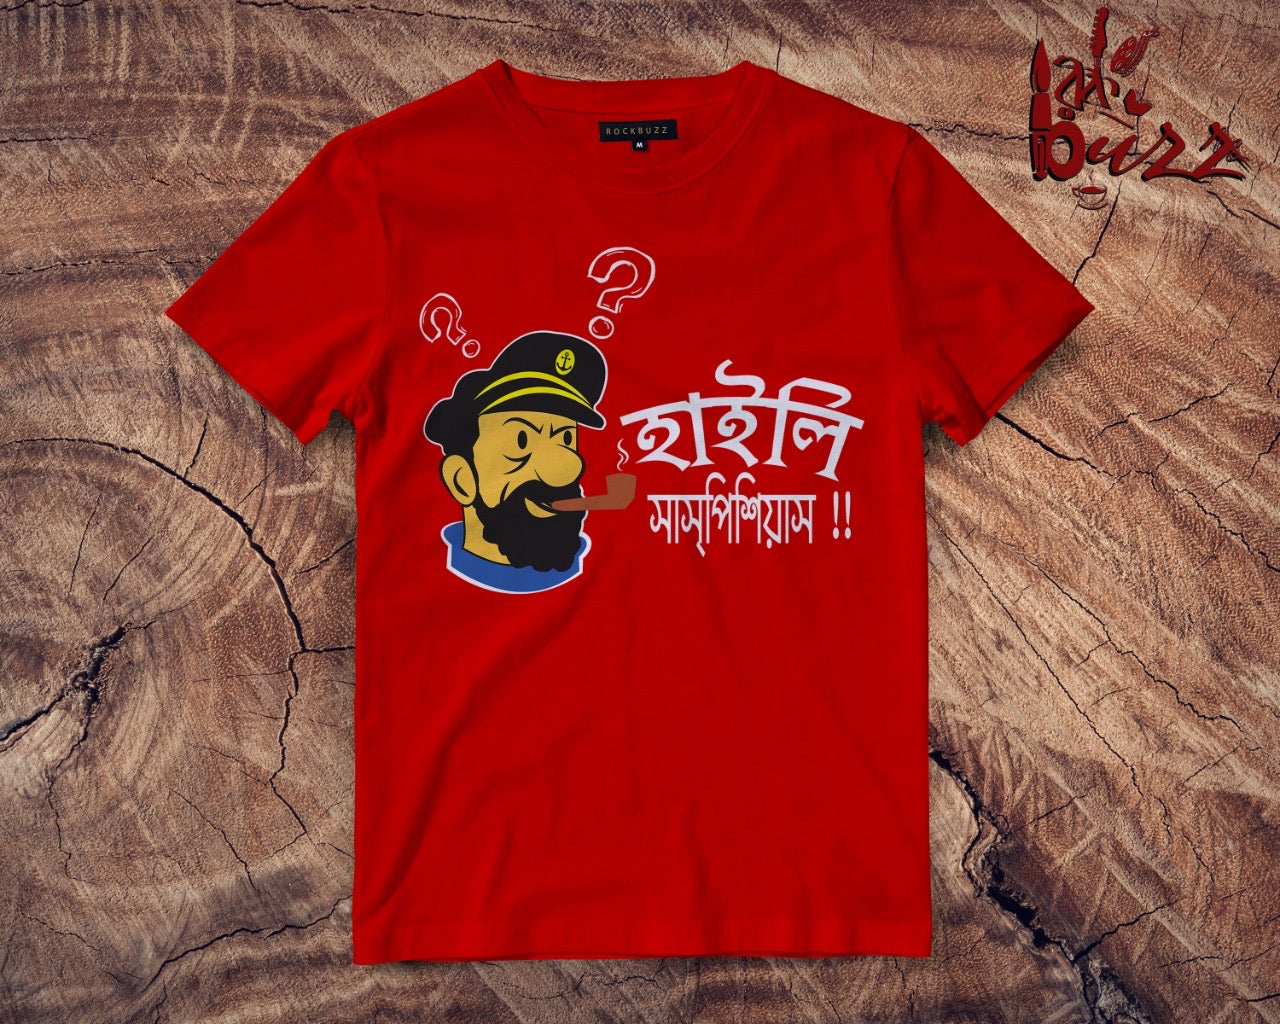 Highly Suspicious Tintin bengali captioned Tshirt - For kids